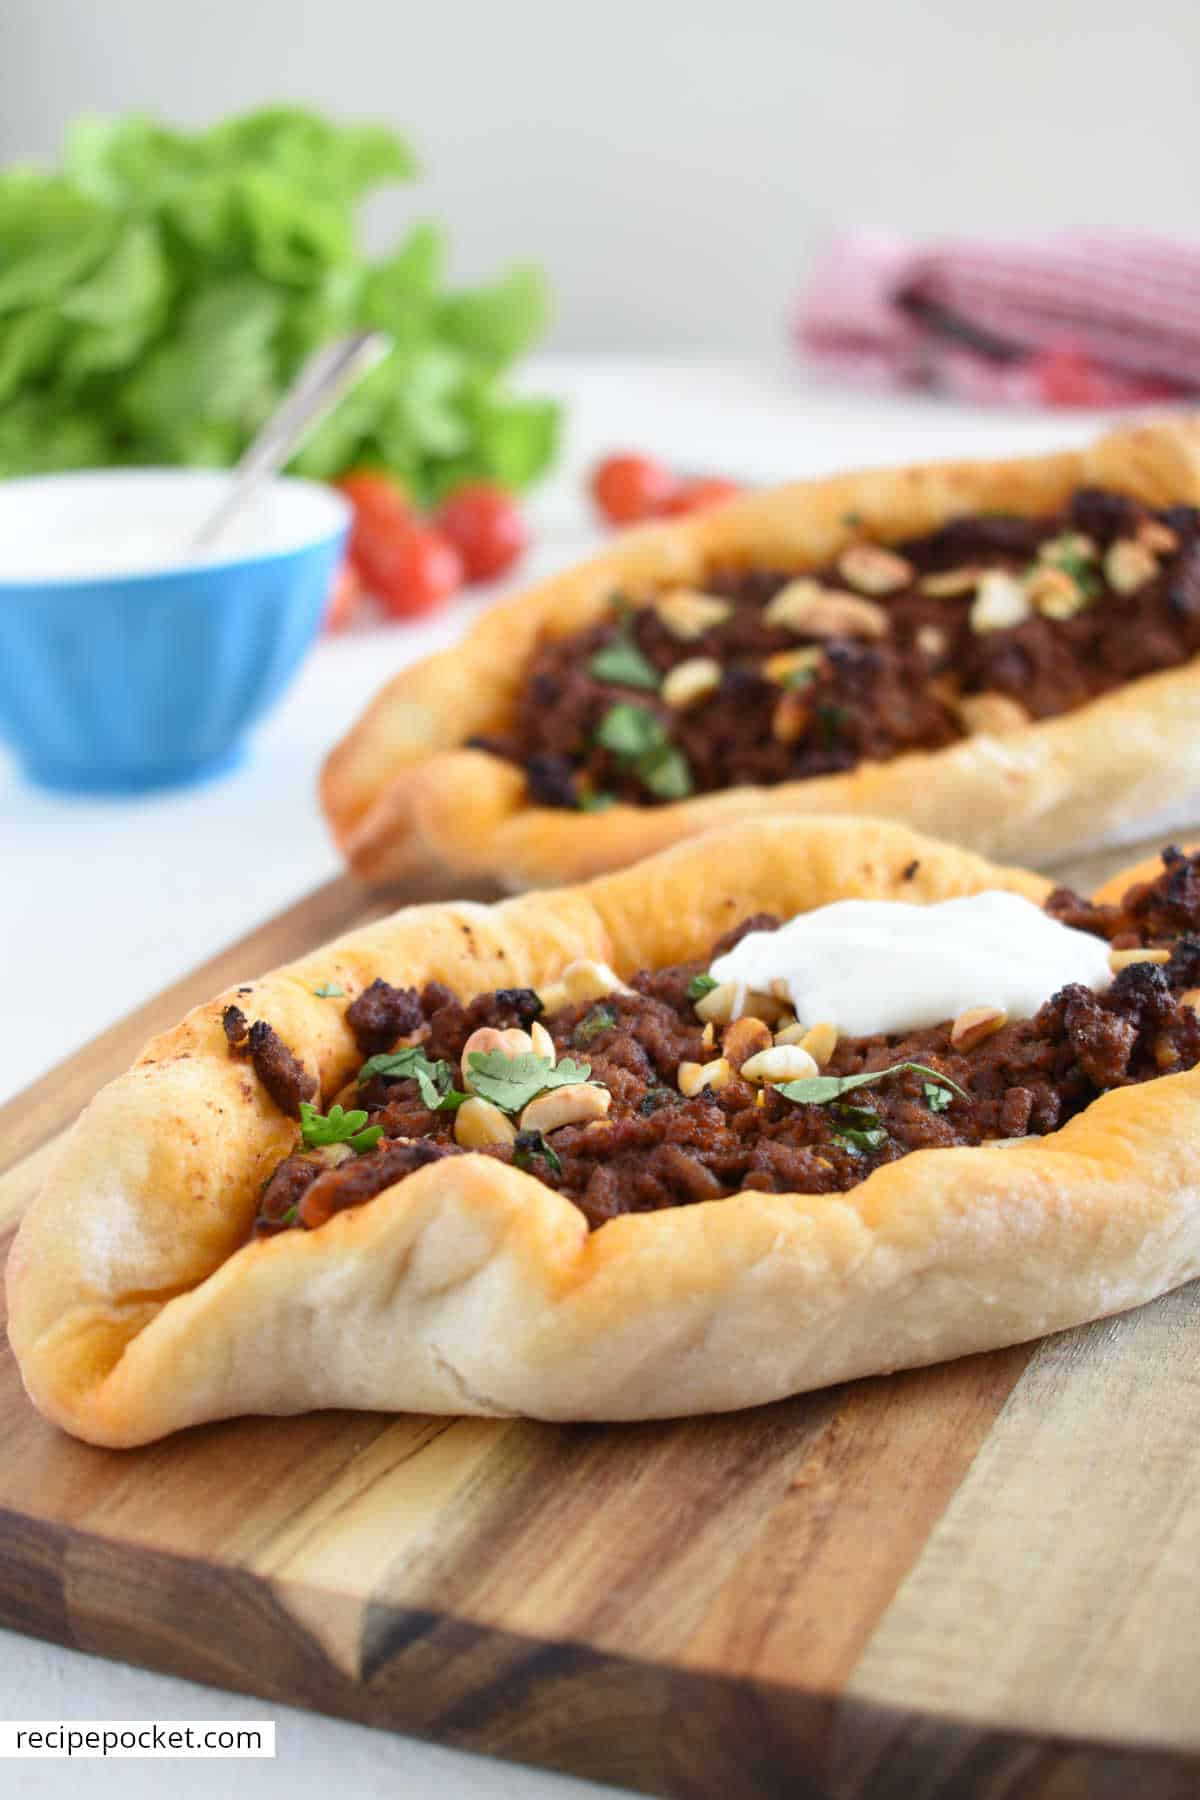 Two Turkish pide pizzas on a wooden board garnished with natural yogurt.